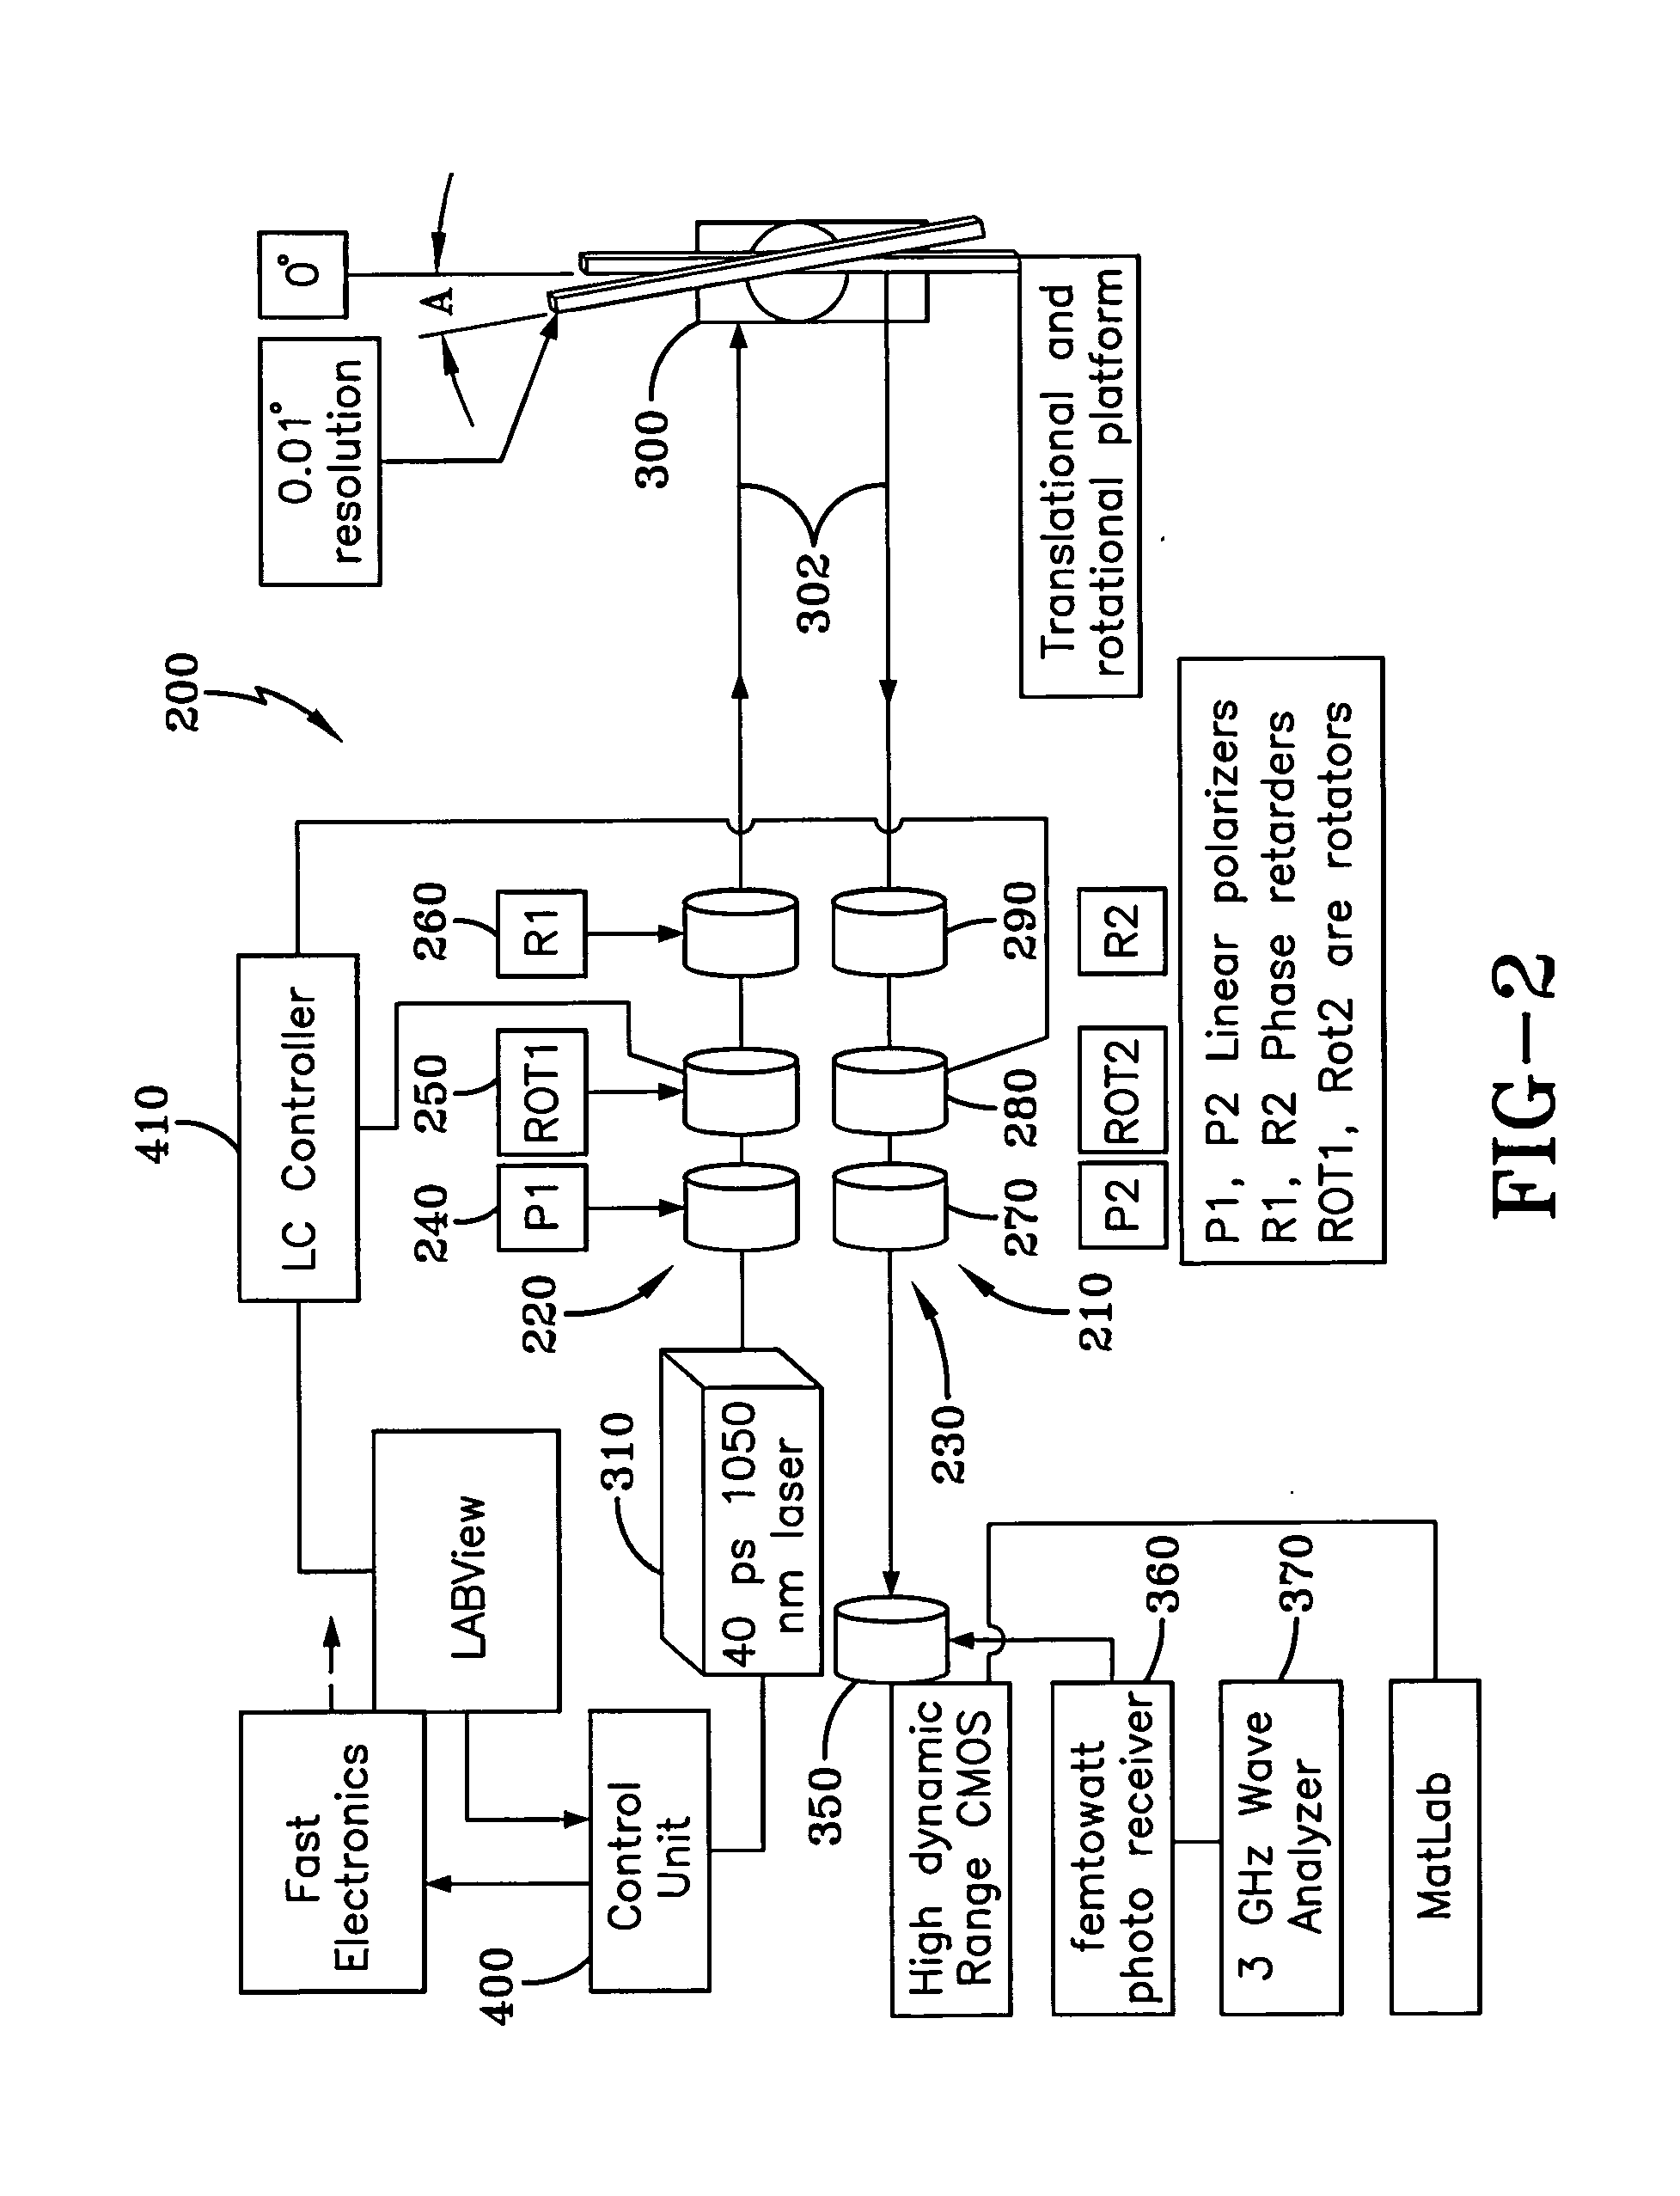 System and method for polarimetric wavelet fractal detection and imaging